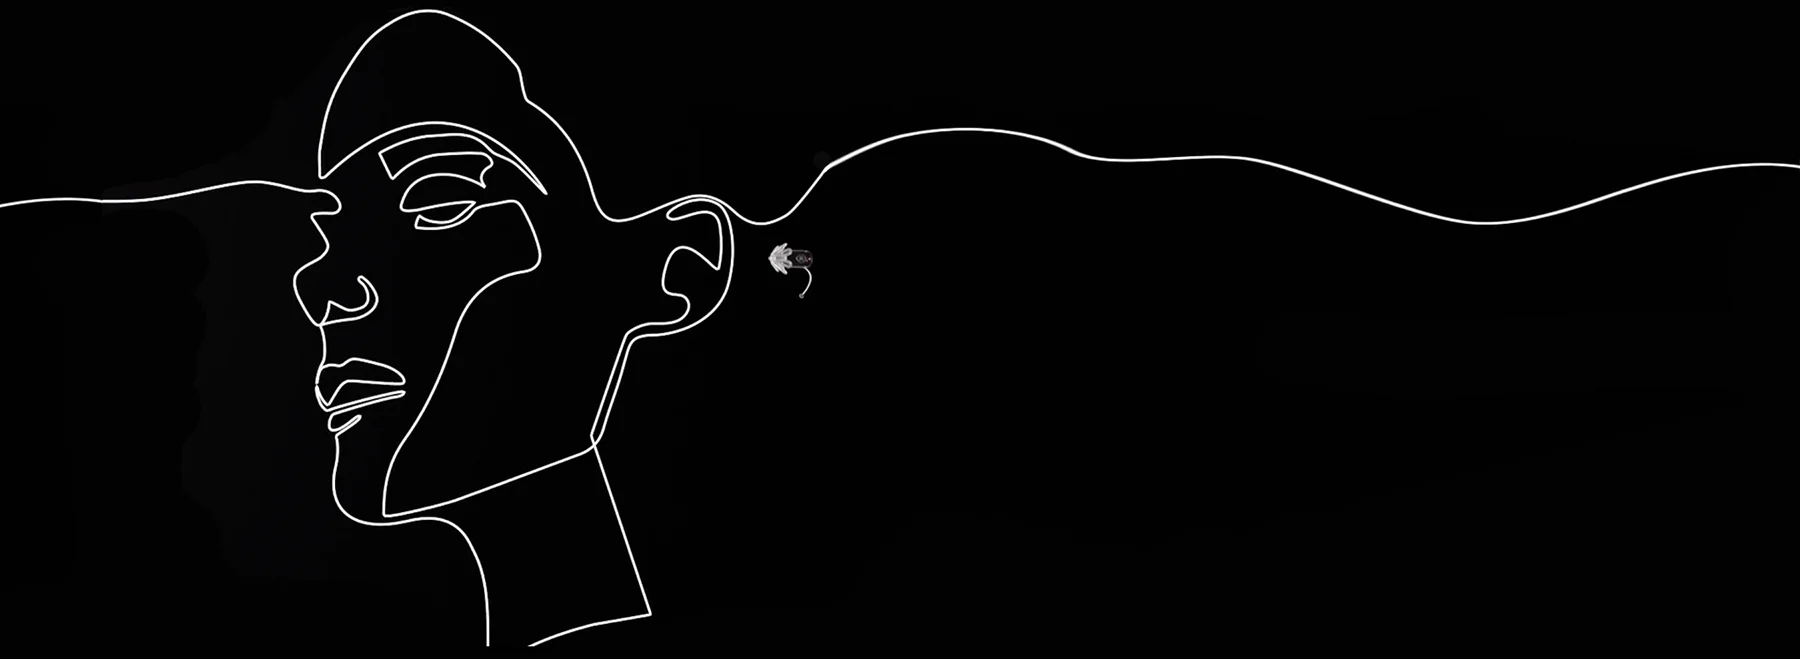 white line art on black background of woman's side profile and Eargo hearing aid